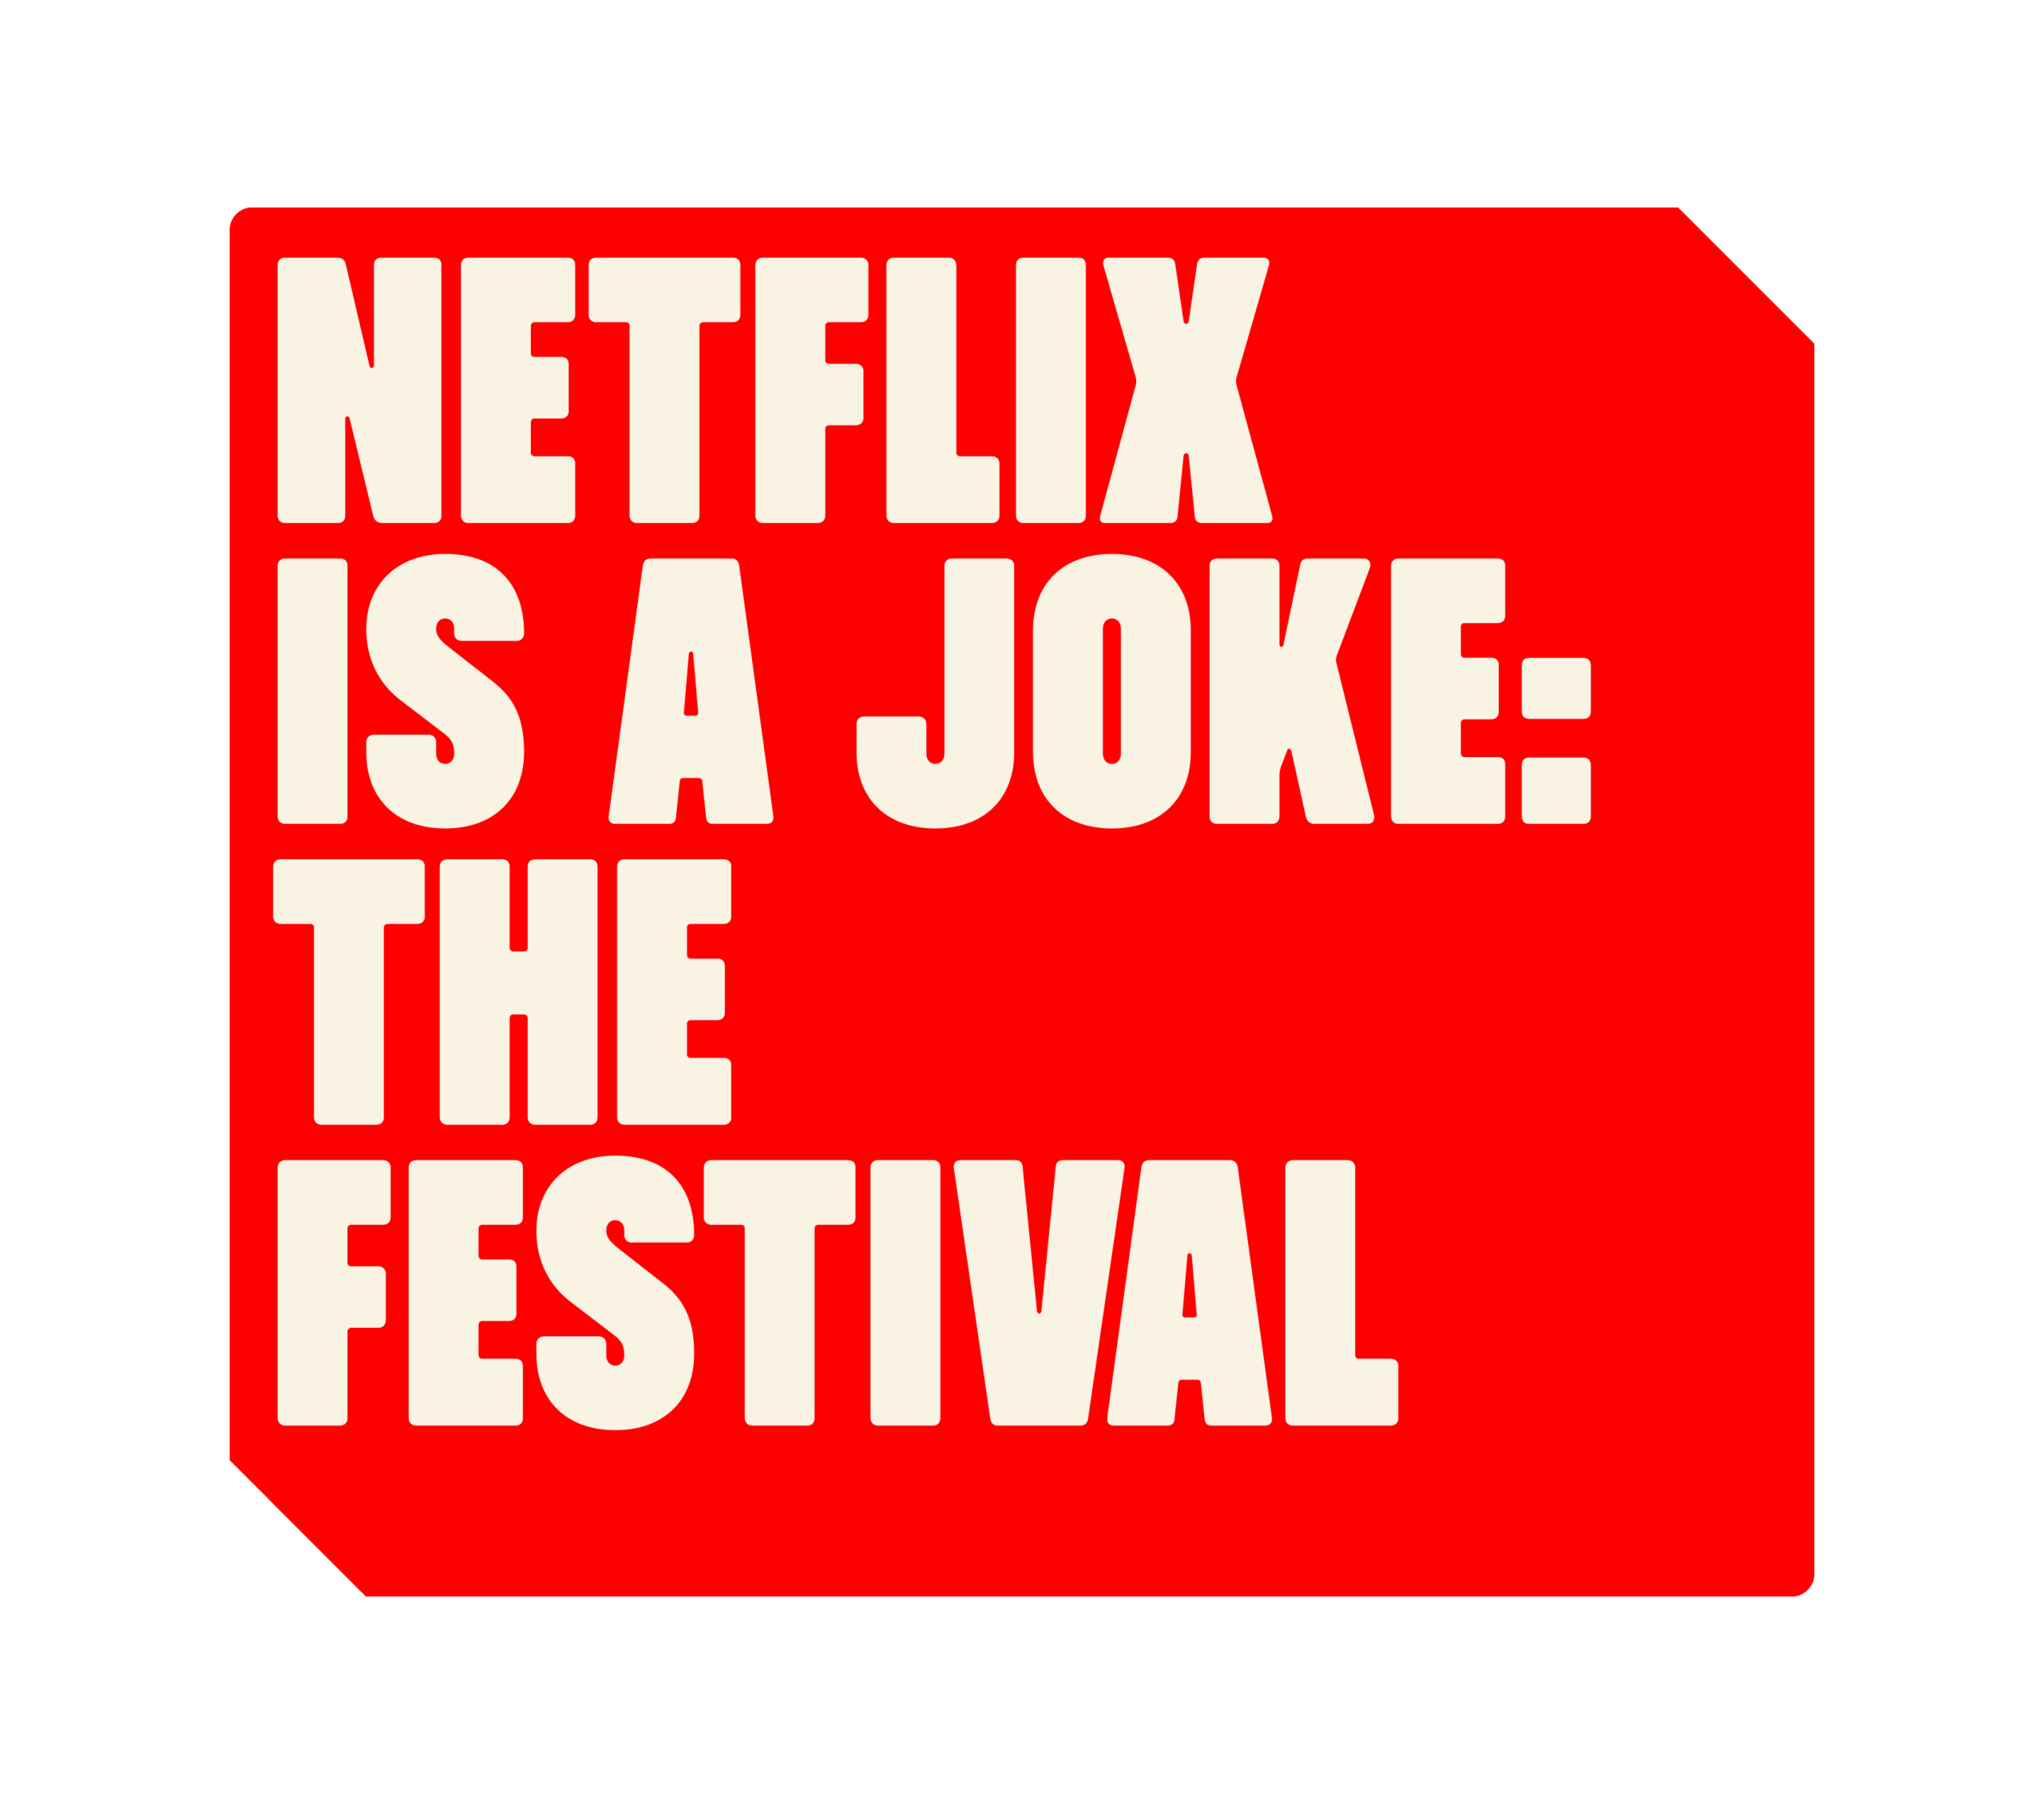 "Live from Last Night" at Netflix Is a Joke: The Festival | Exclusive Clip and Photos - DAY NINE